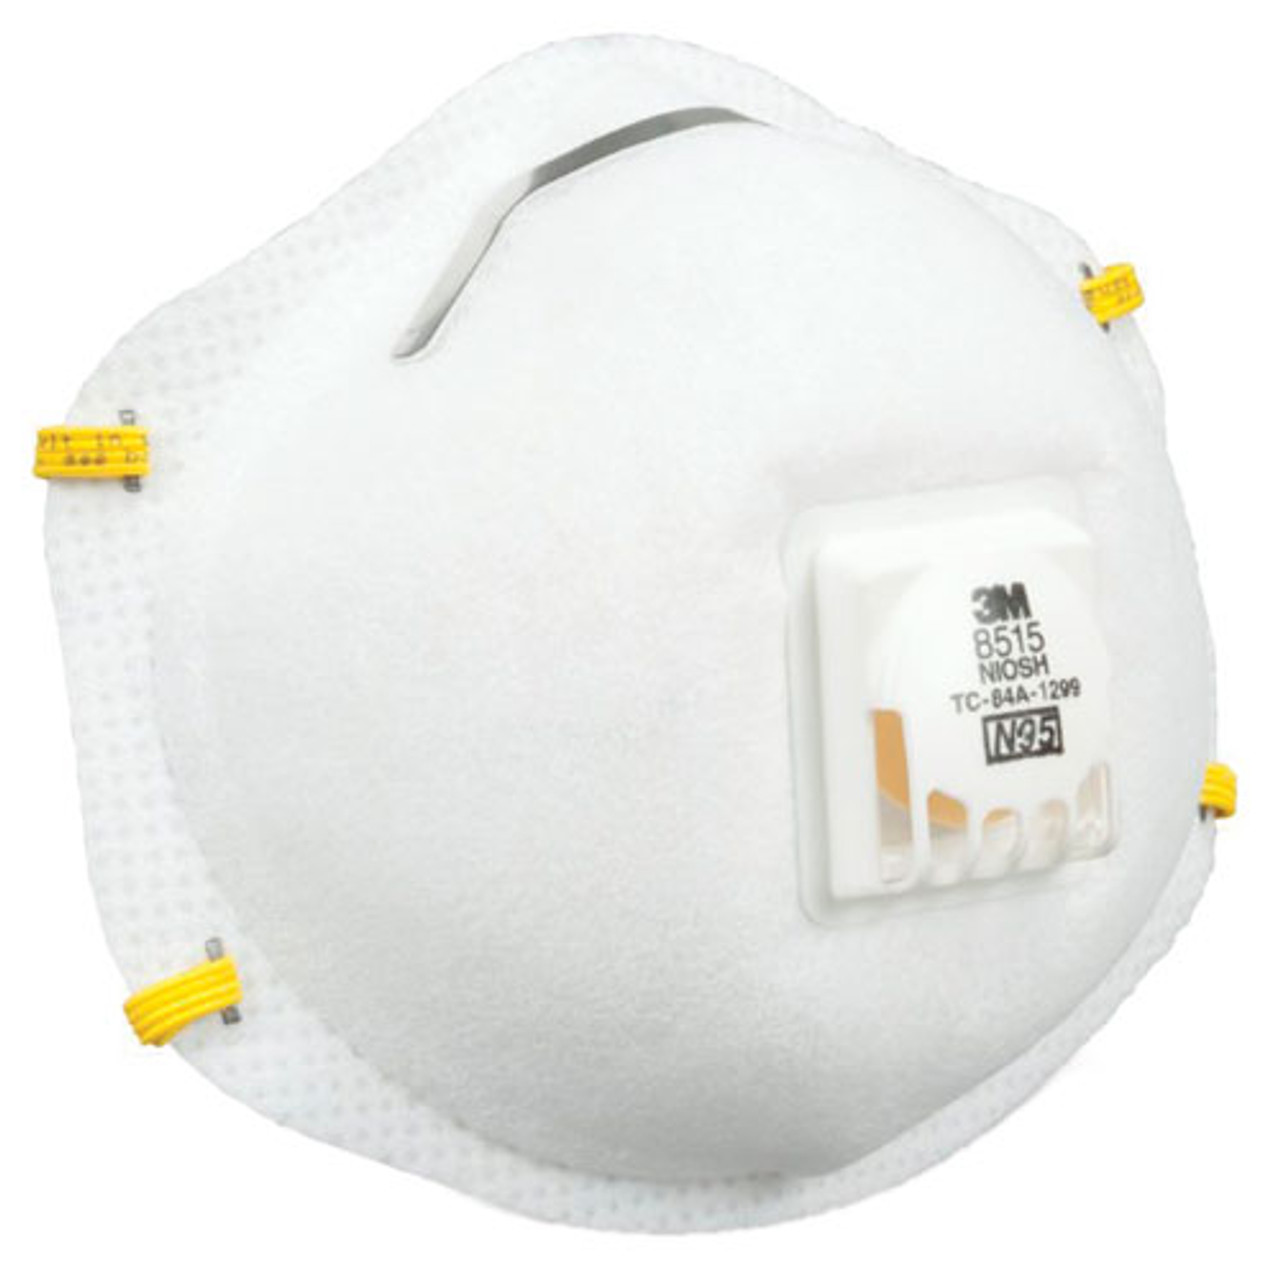 3M™ Disposable Particulate Welding Respirators - Box of 10 Masks